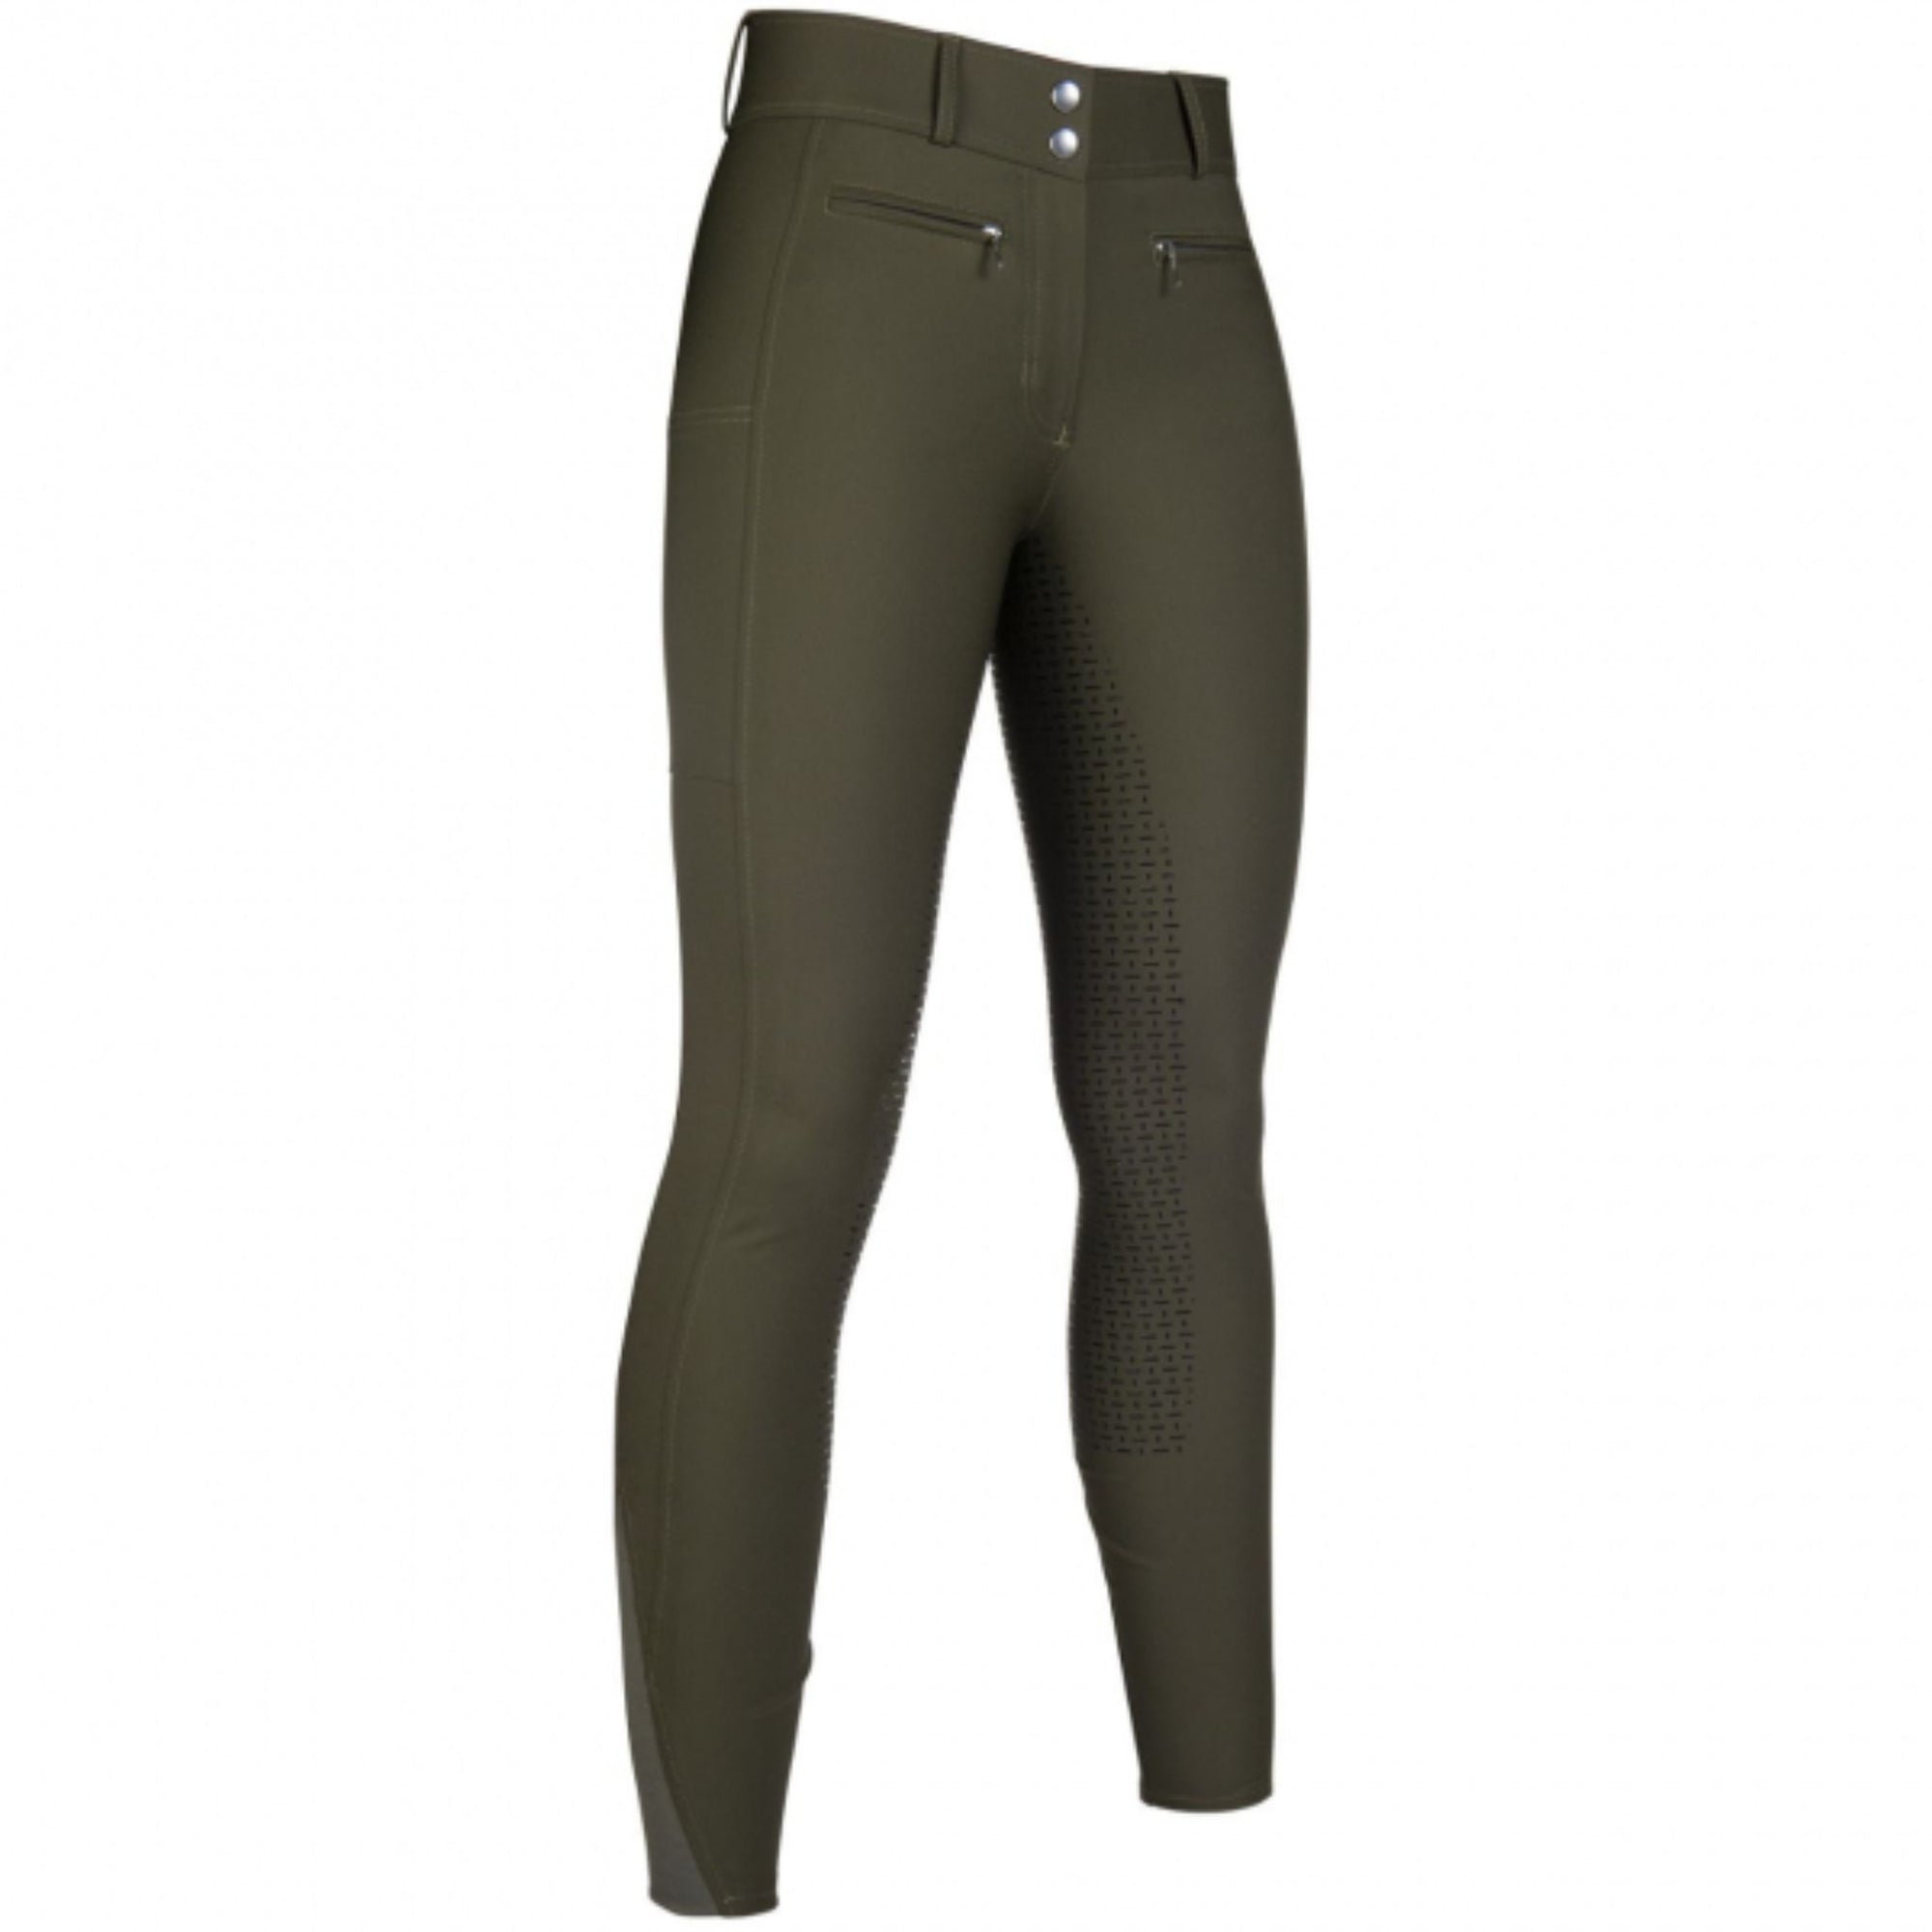 Dark green breeches with metal double buttons and grip seat.